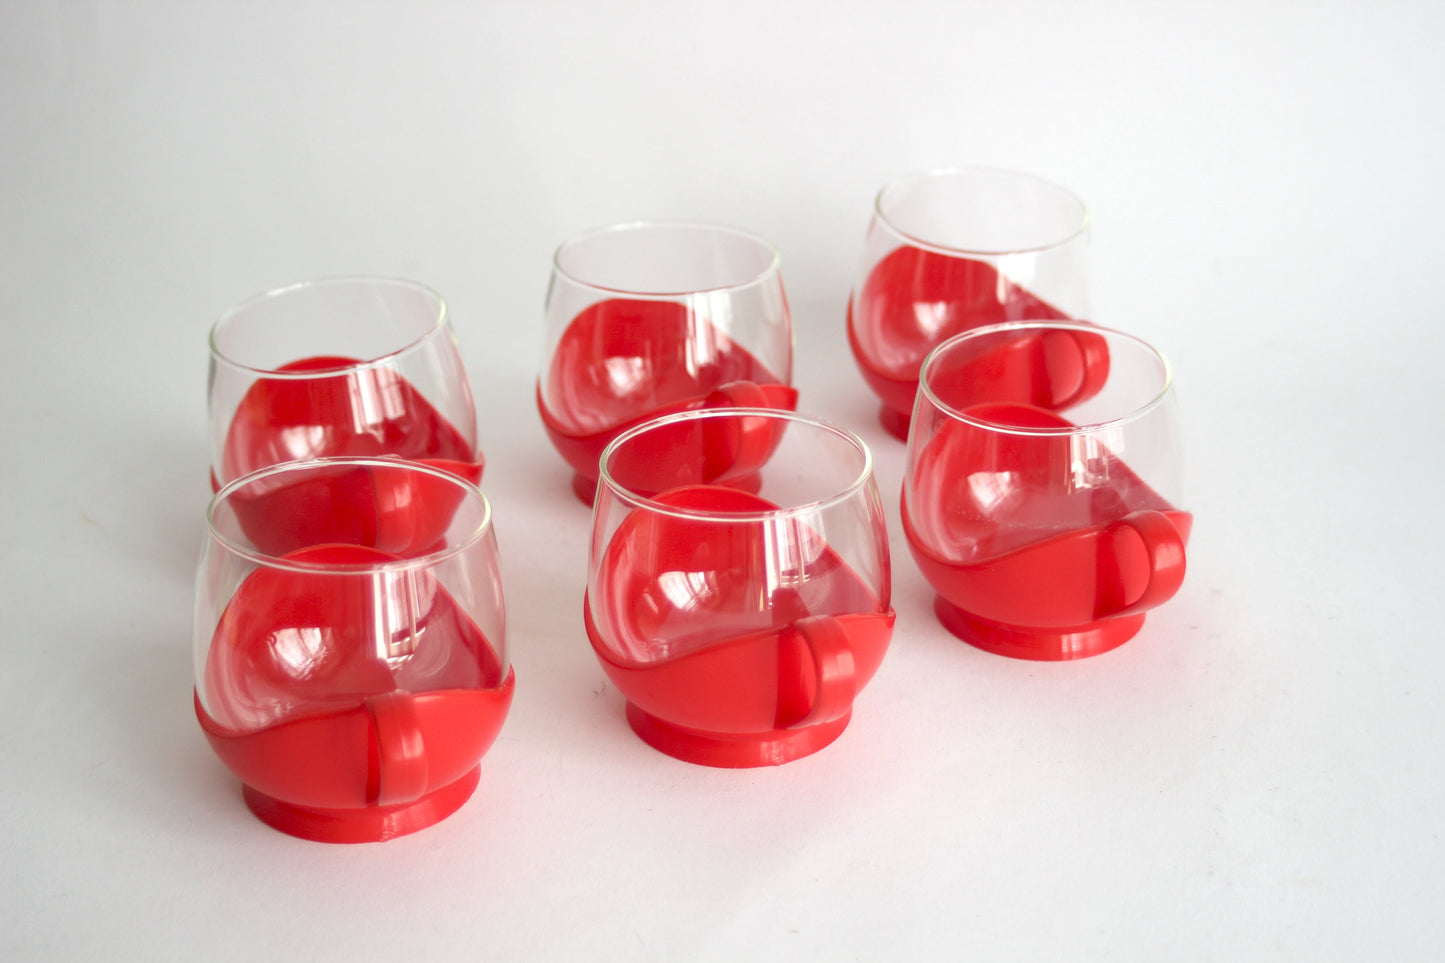 MELITTA GERMANY Set of 6 red glass tumblers for tea or coffee with plastic handles - 60s / 70s